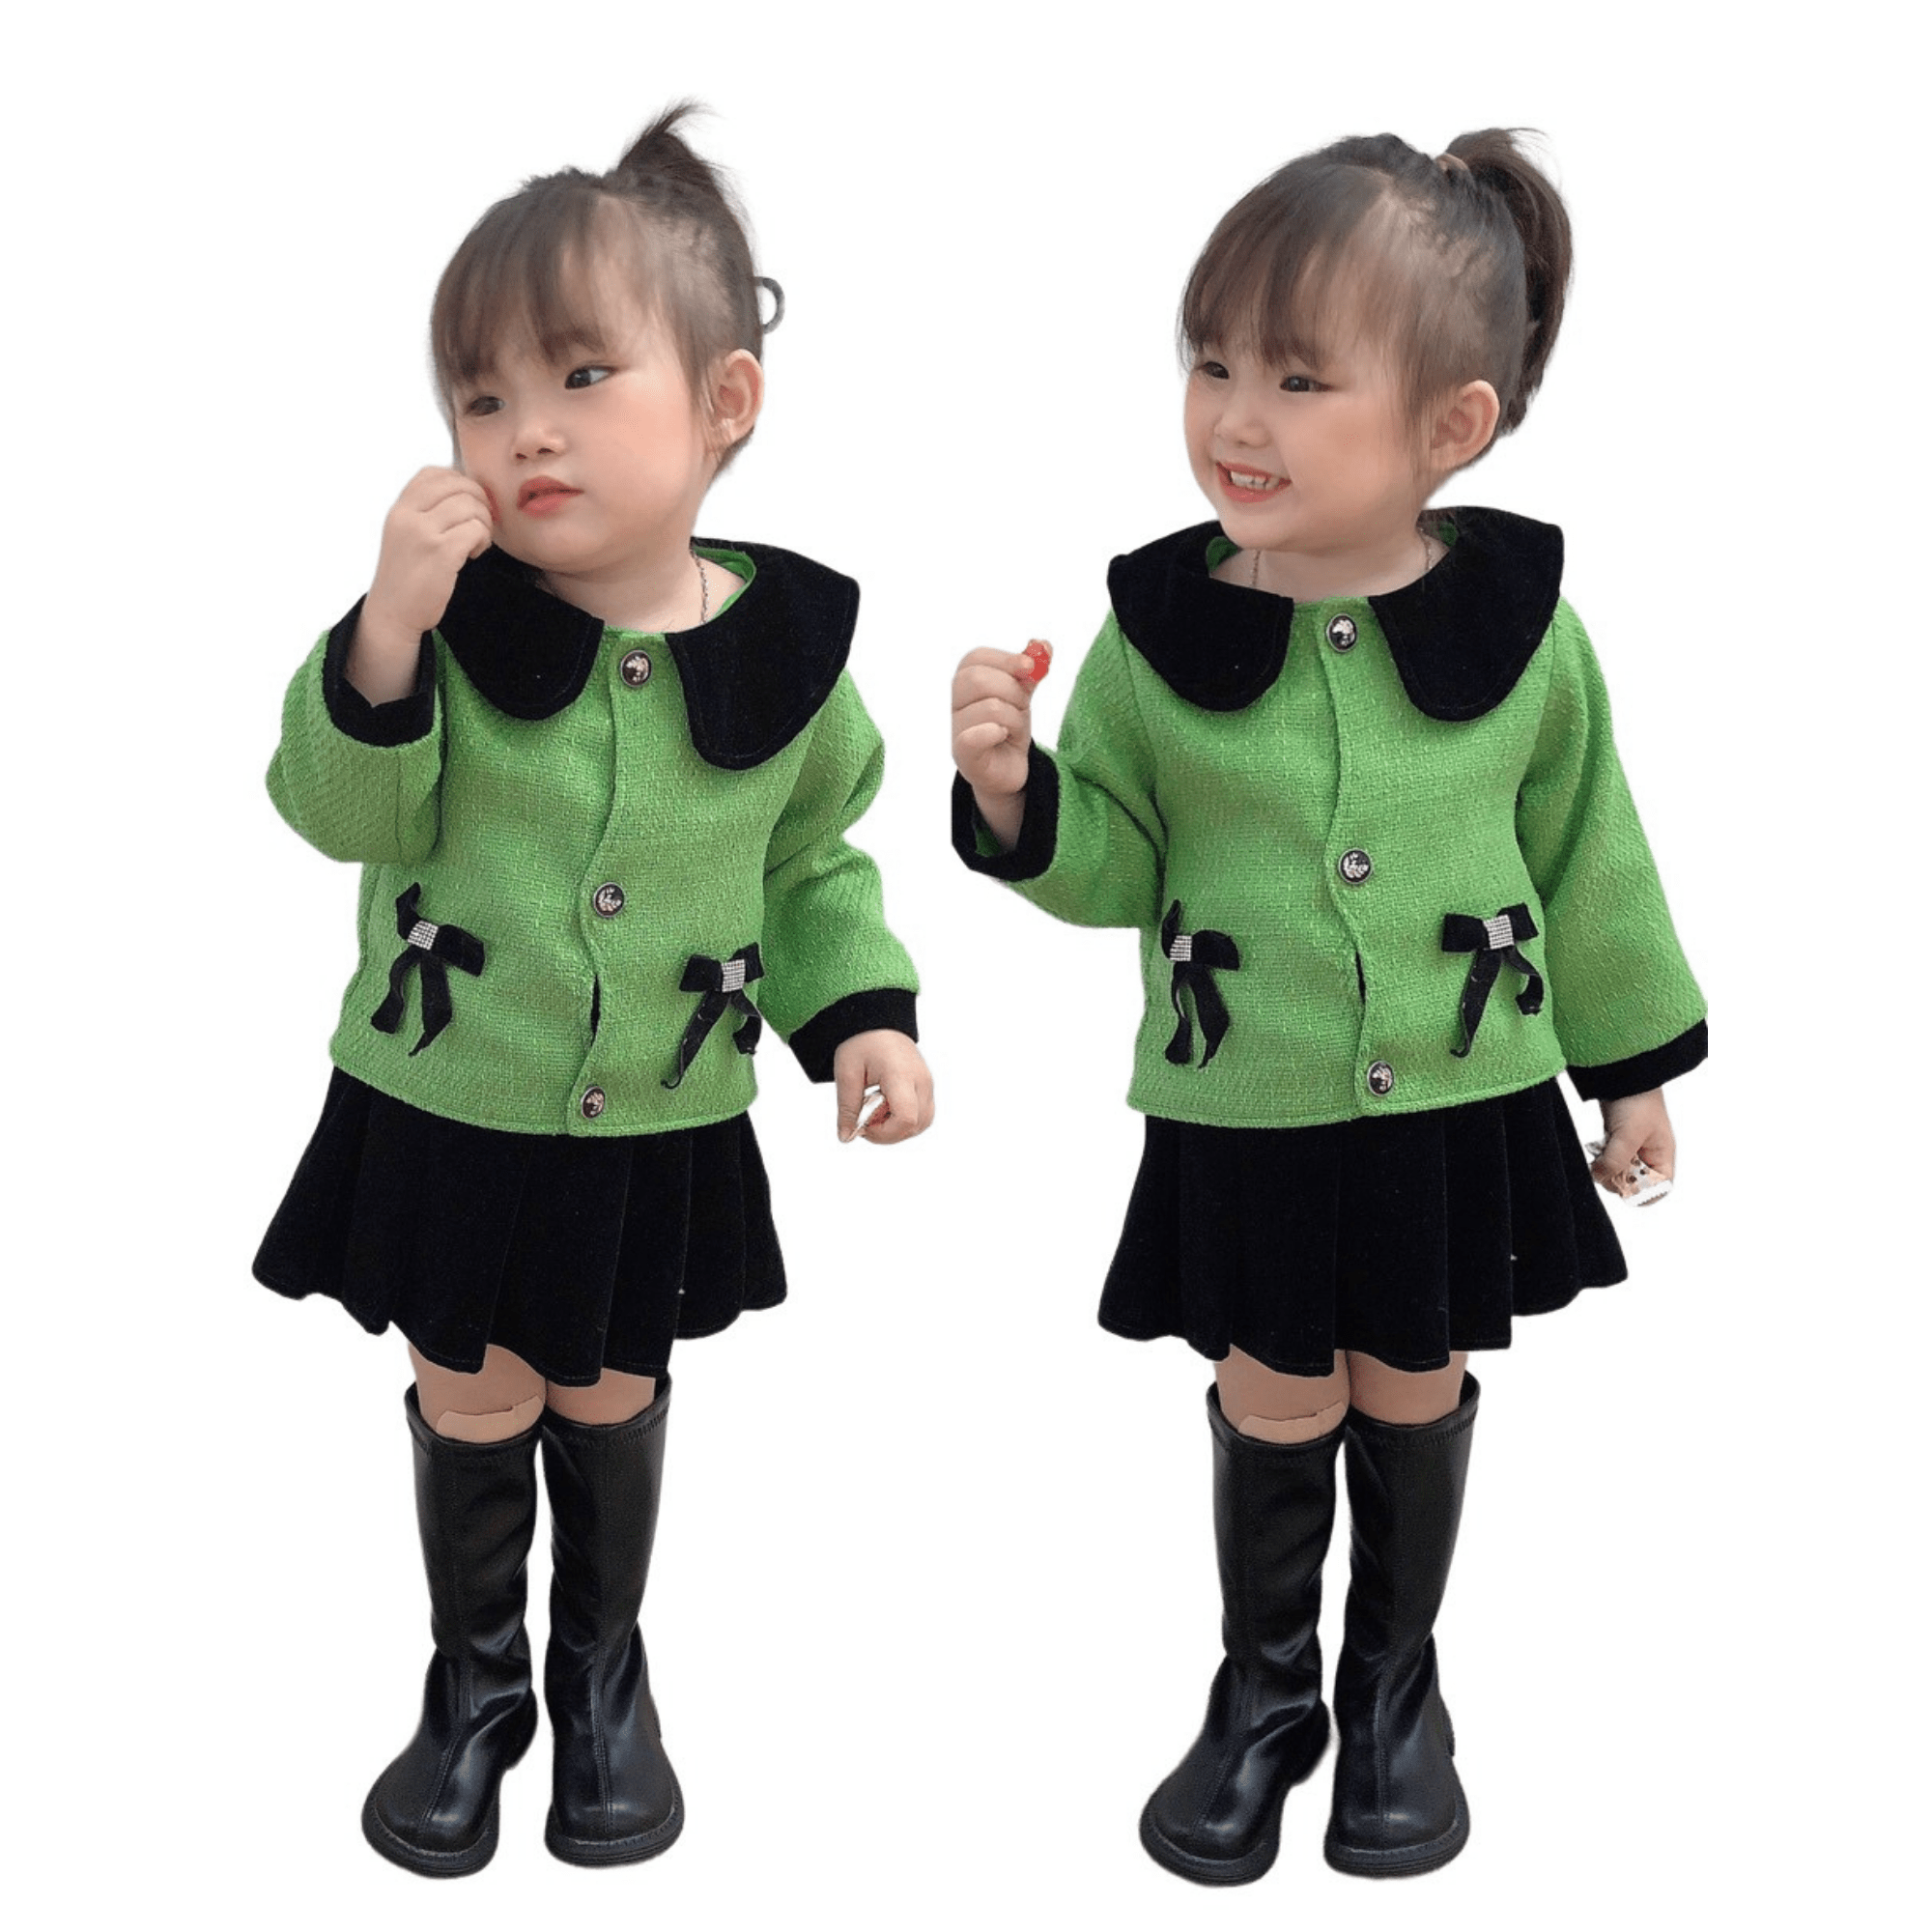 Winter Clothes For Kids High Quality 100% Wool Dresses New Fashion Each One In Opp Bag From Vietnam Manufacturer 4